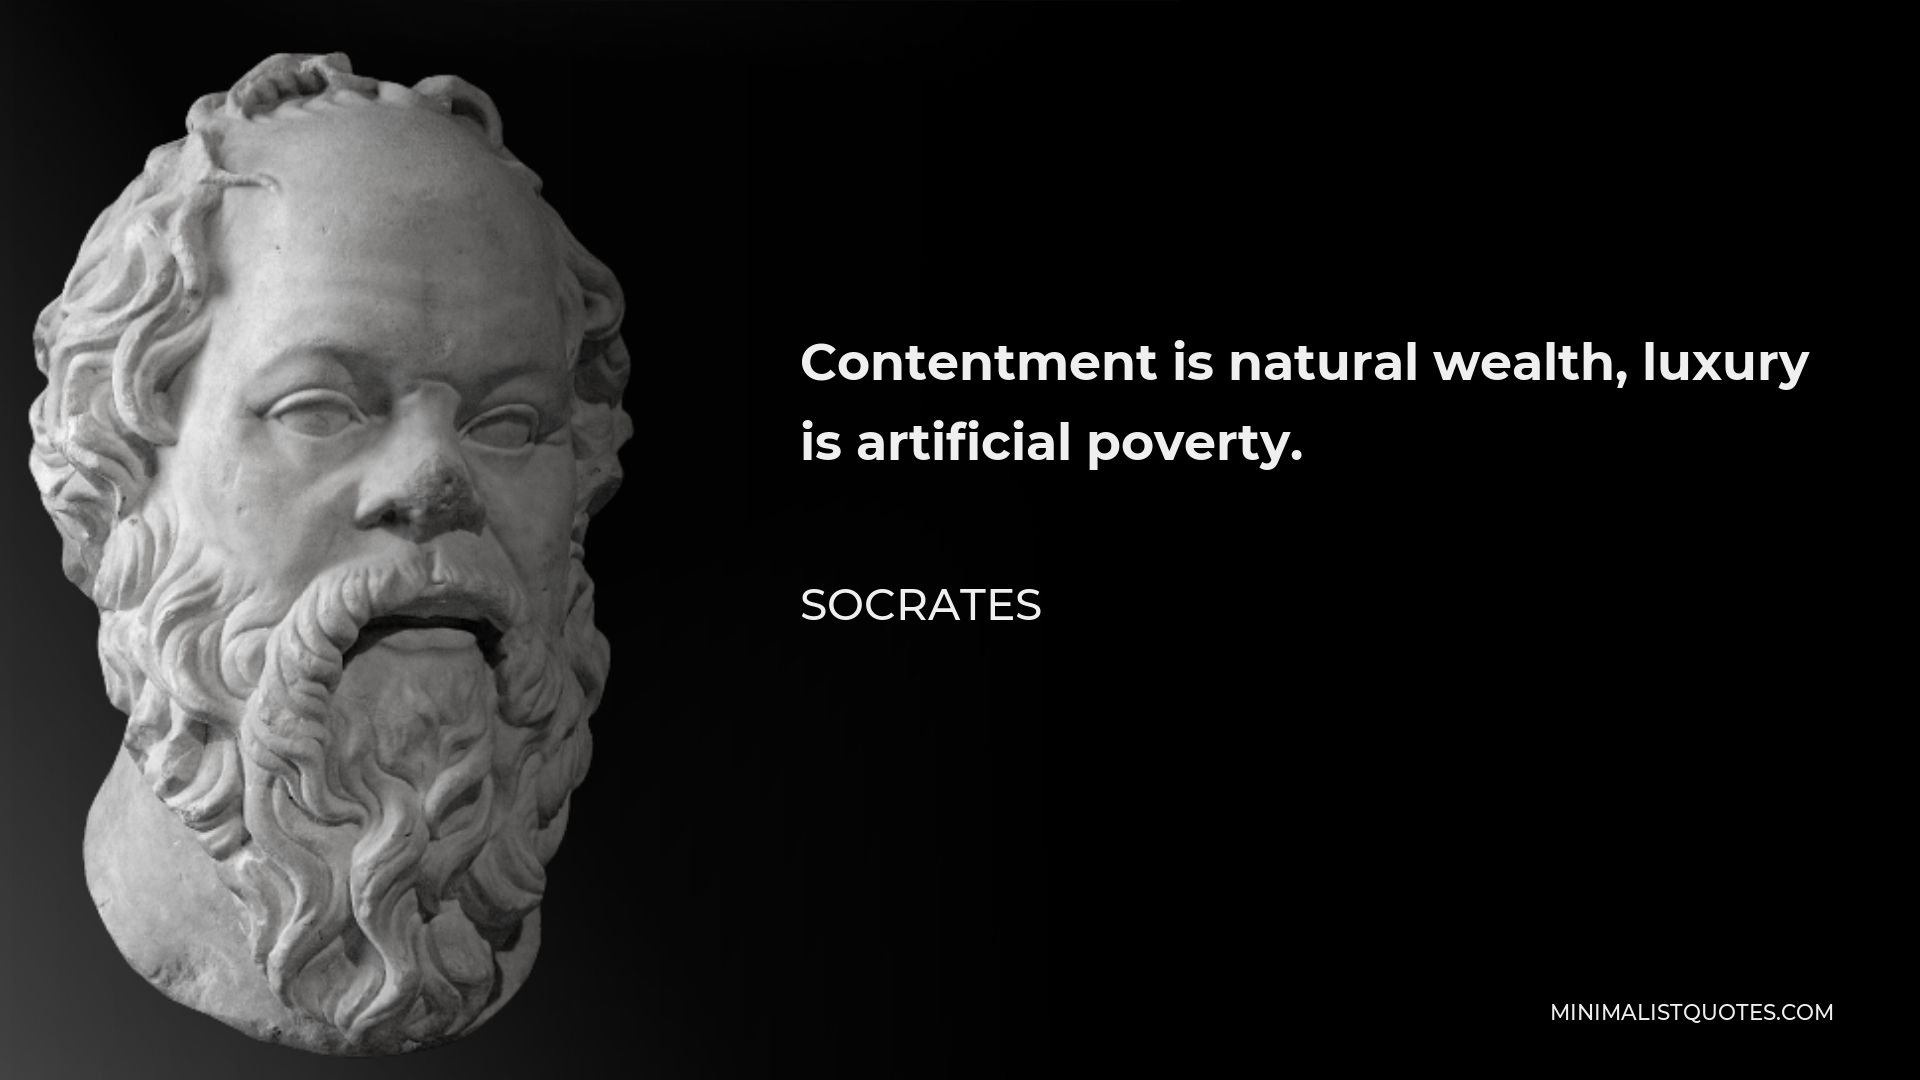 Socrates Quote - Contentment is natural wealth, luxury is artificial poverty.